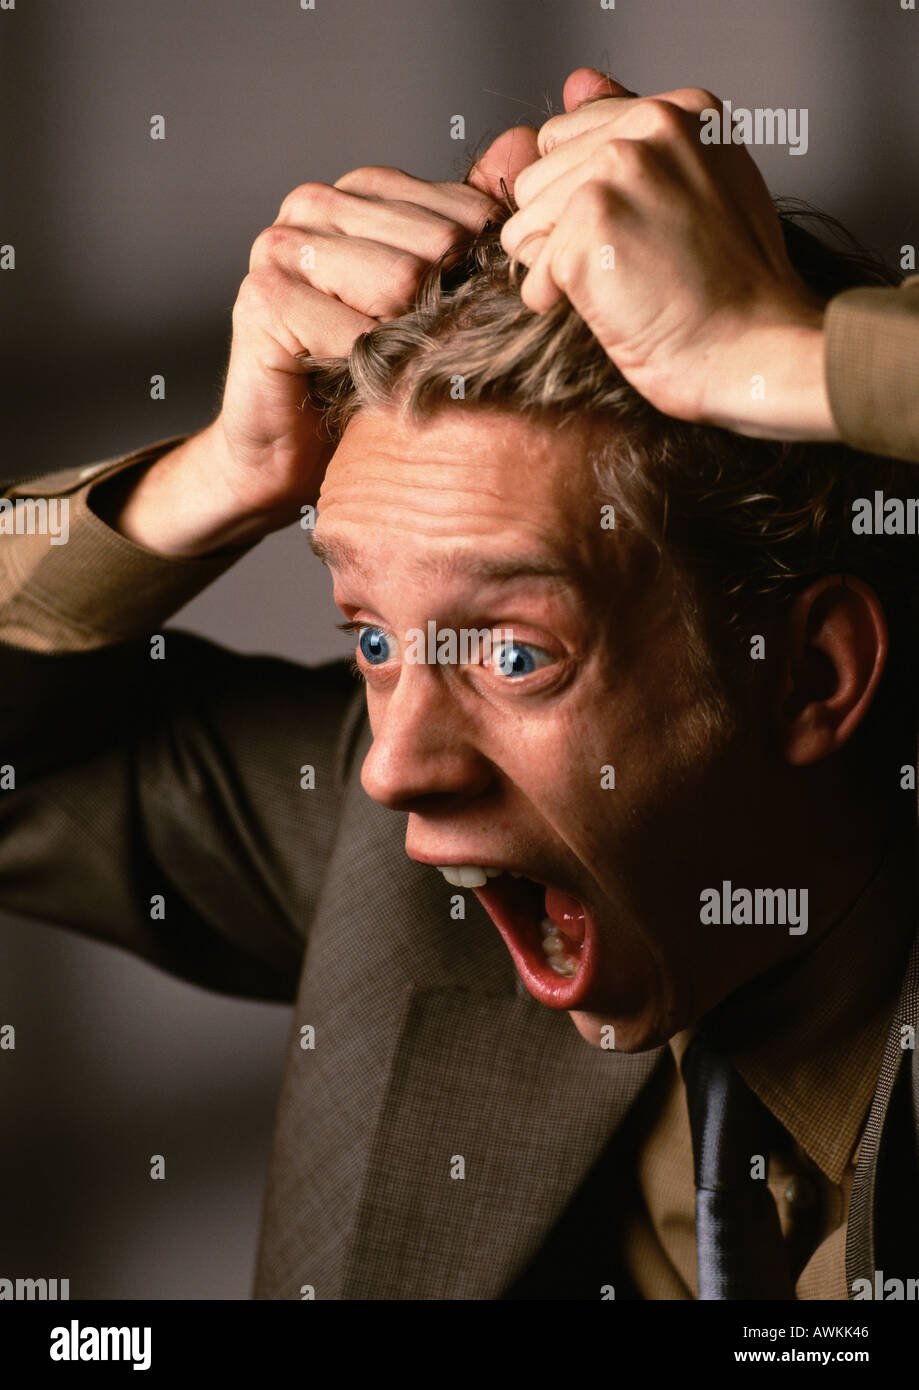 Man with mouth and eyes wide open, pulling hair, close-up Stock Photo